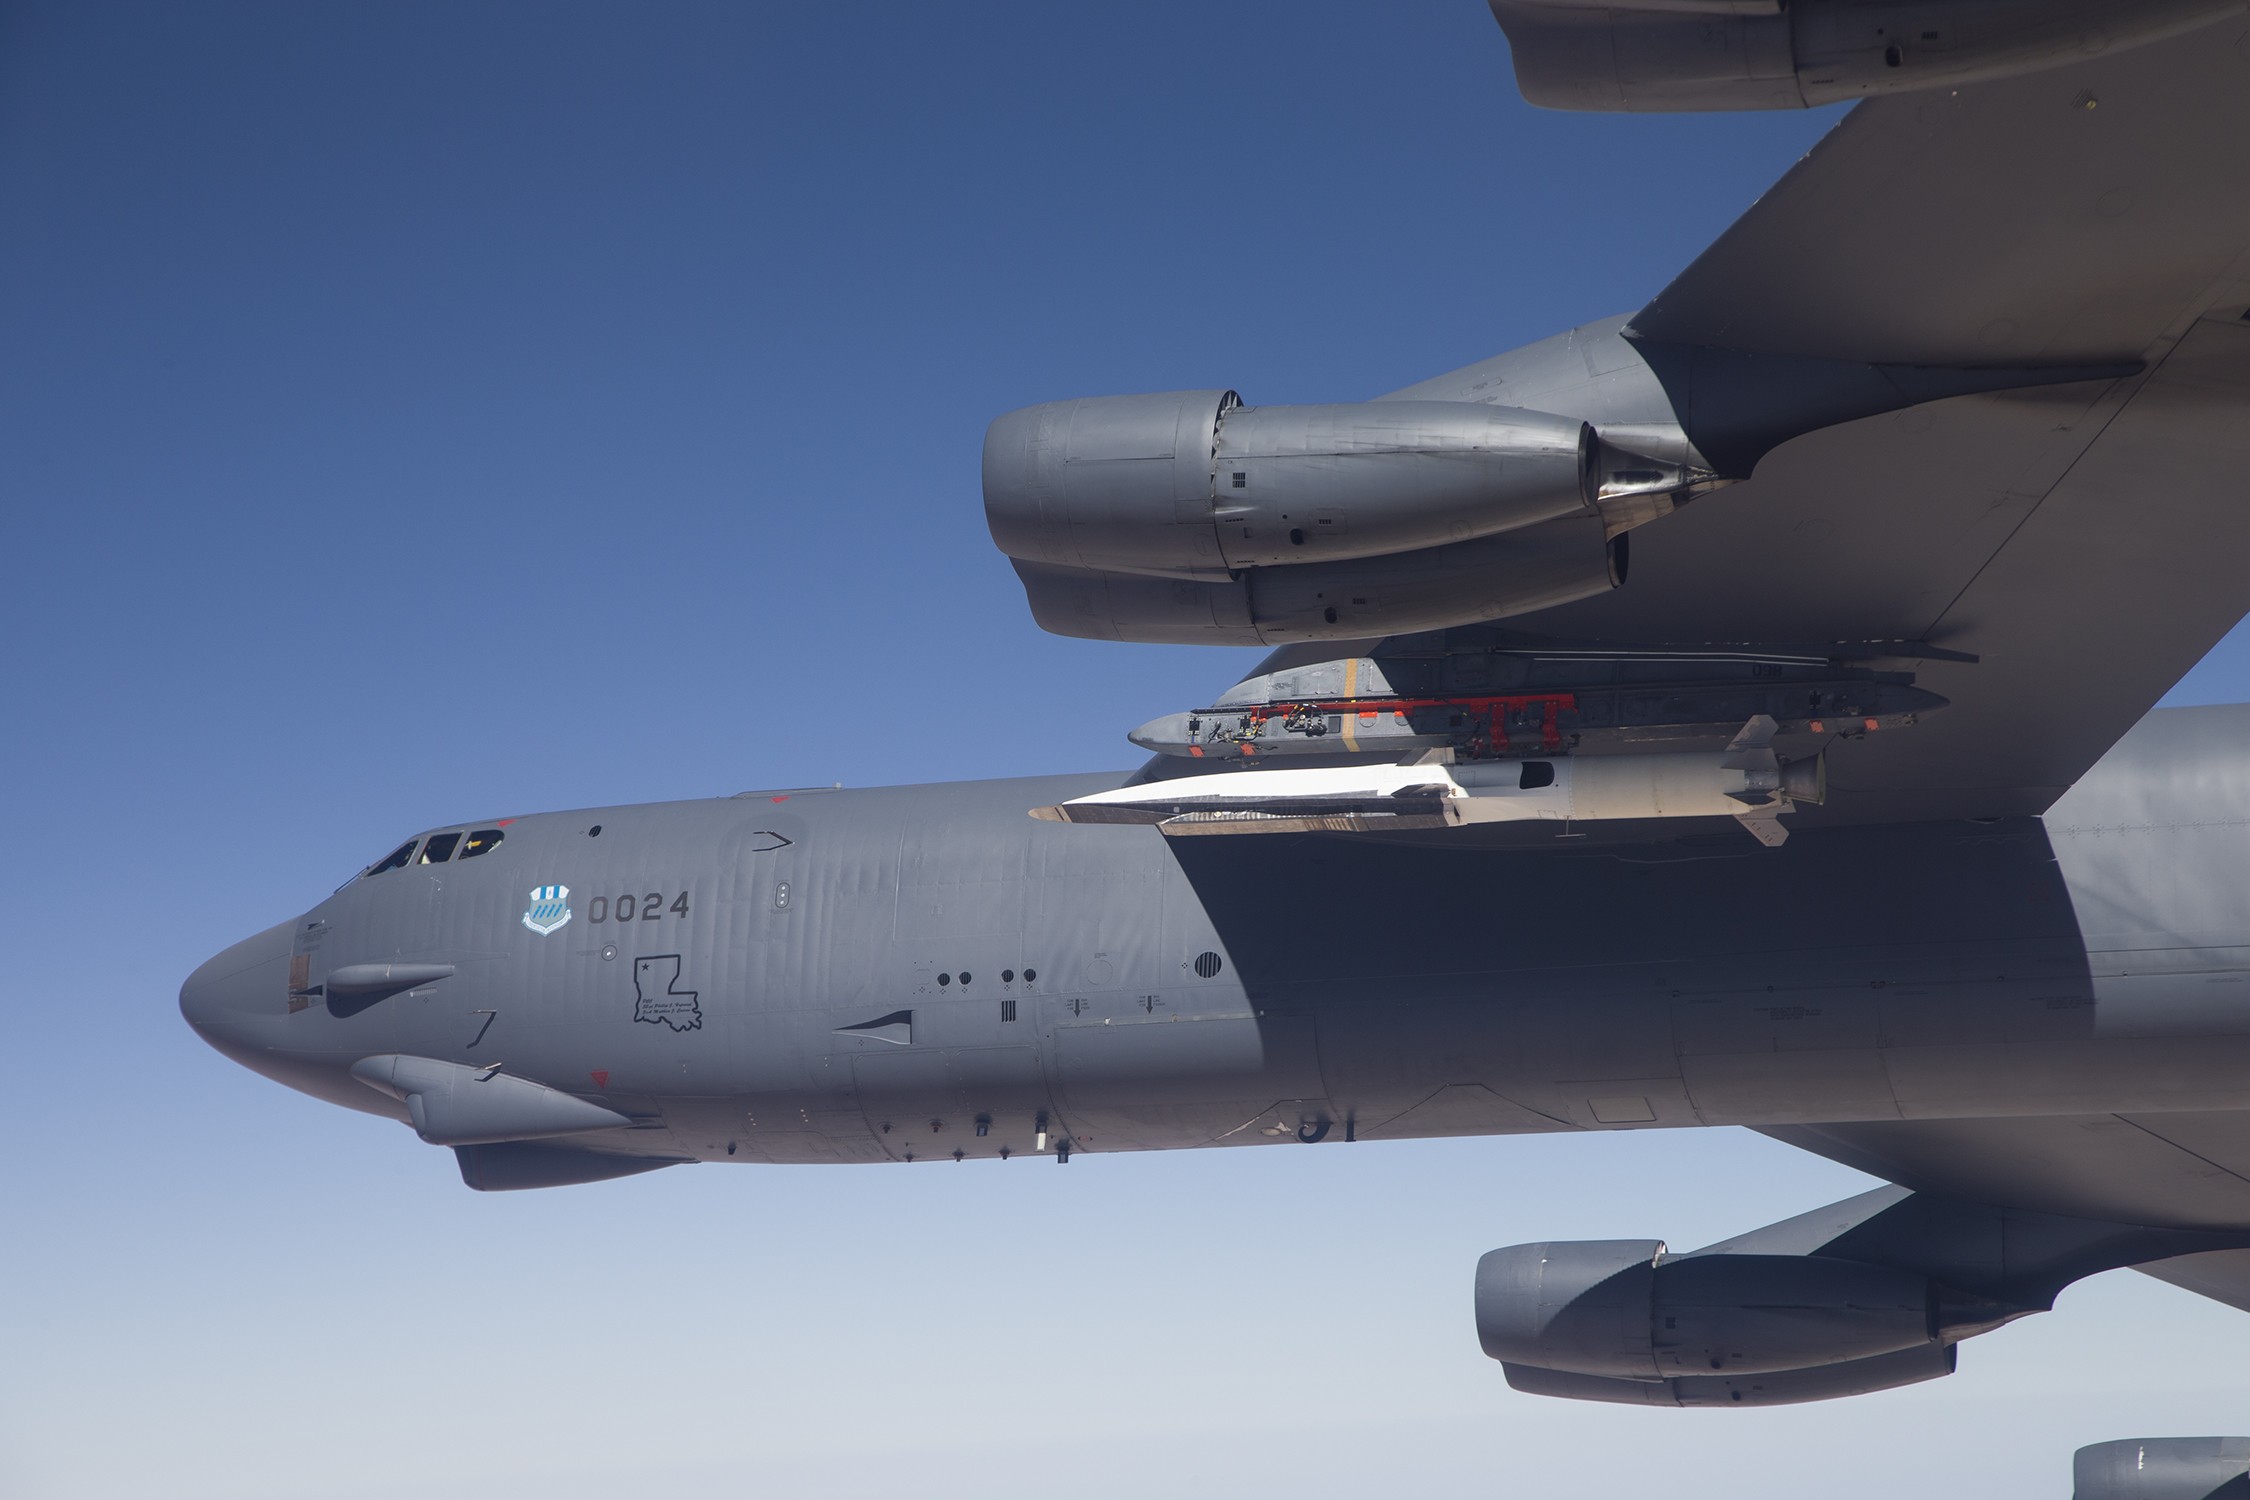 Lockheed Martin receives almost $1 billion for new hyper-sonic weapon system